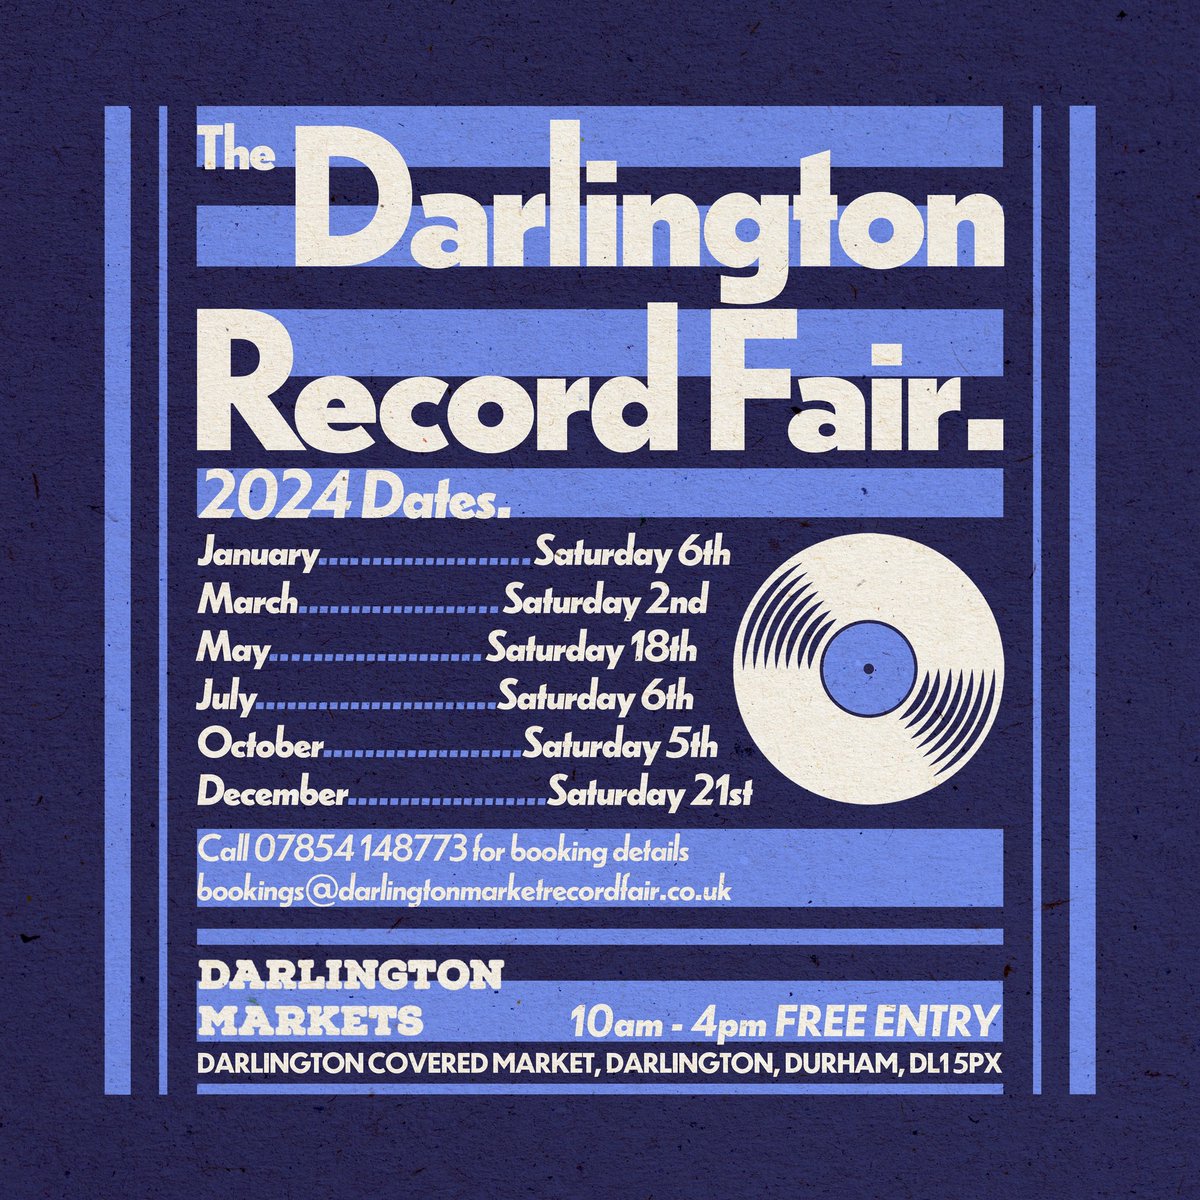 💿 The Darlington Market Record Fair returns tomorrow (Saturday 6th January) 🎶 Browse a wide selection of genres and eras of music that suits all budgets 🕙 The record fair takes place between 10am - 4pm ℹ️ facebook.com/DarlingtonMark…